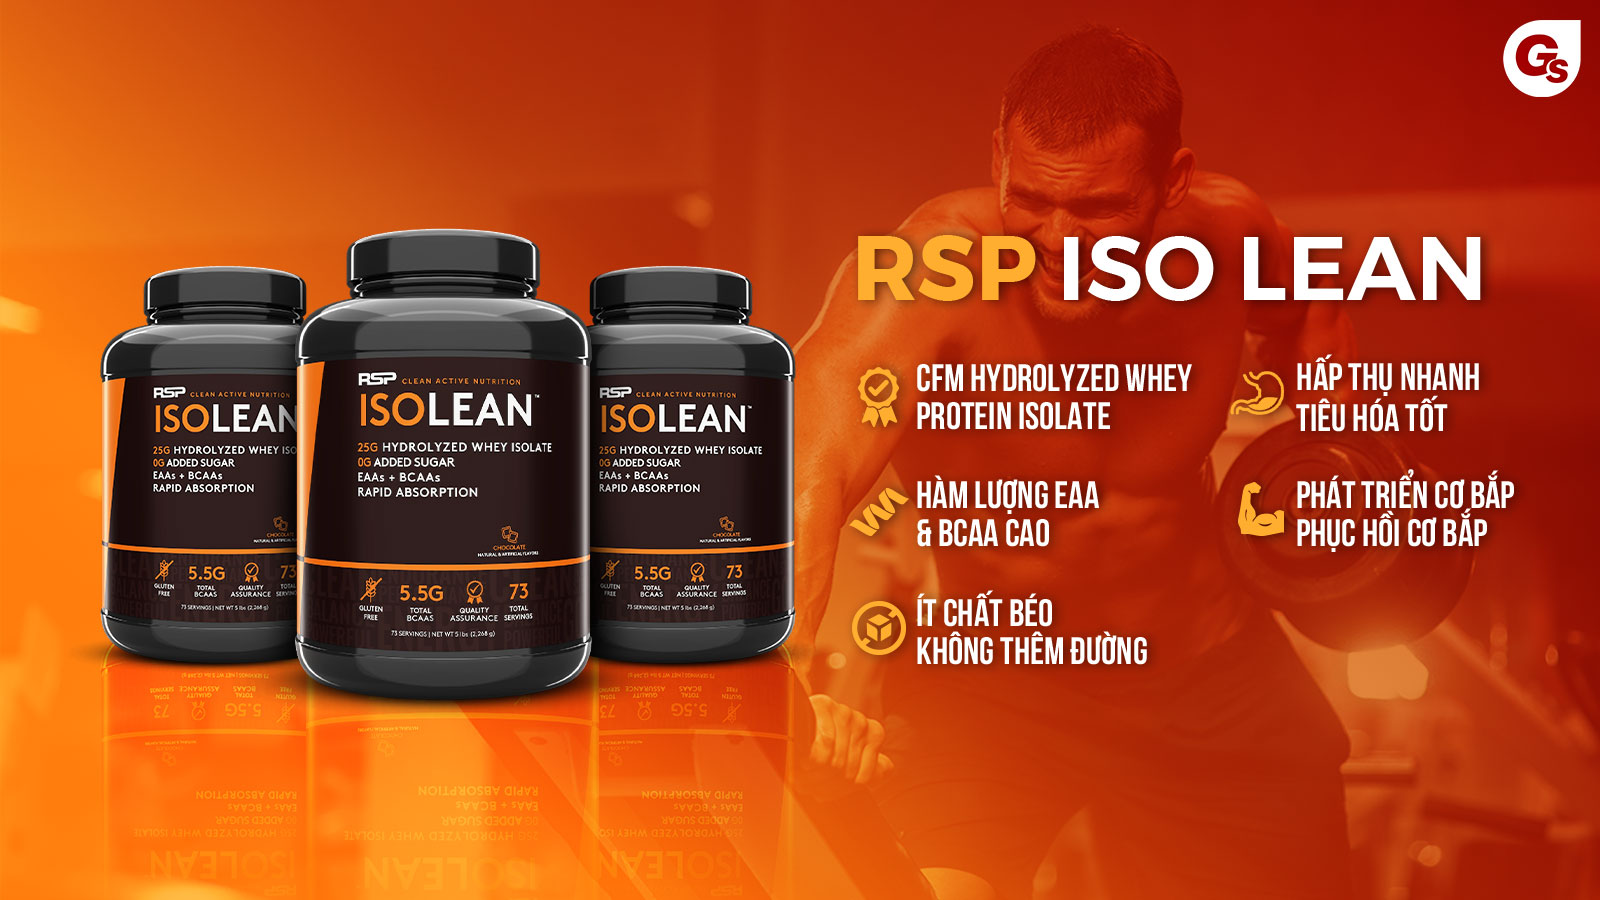 Rsp-Isolean-whey-protein-phat-trien-co-bap-gymstore